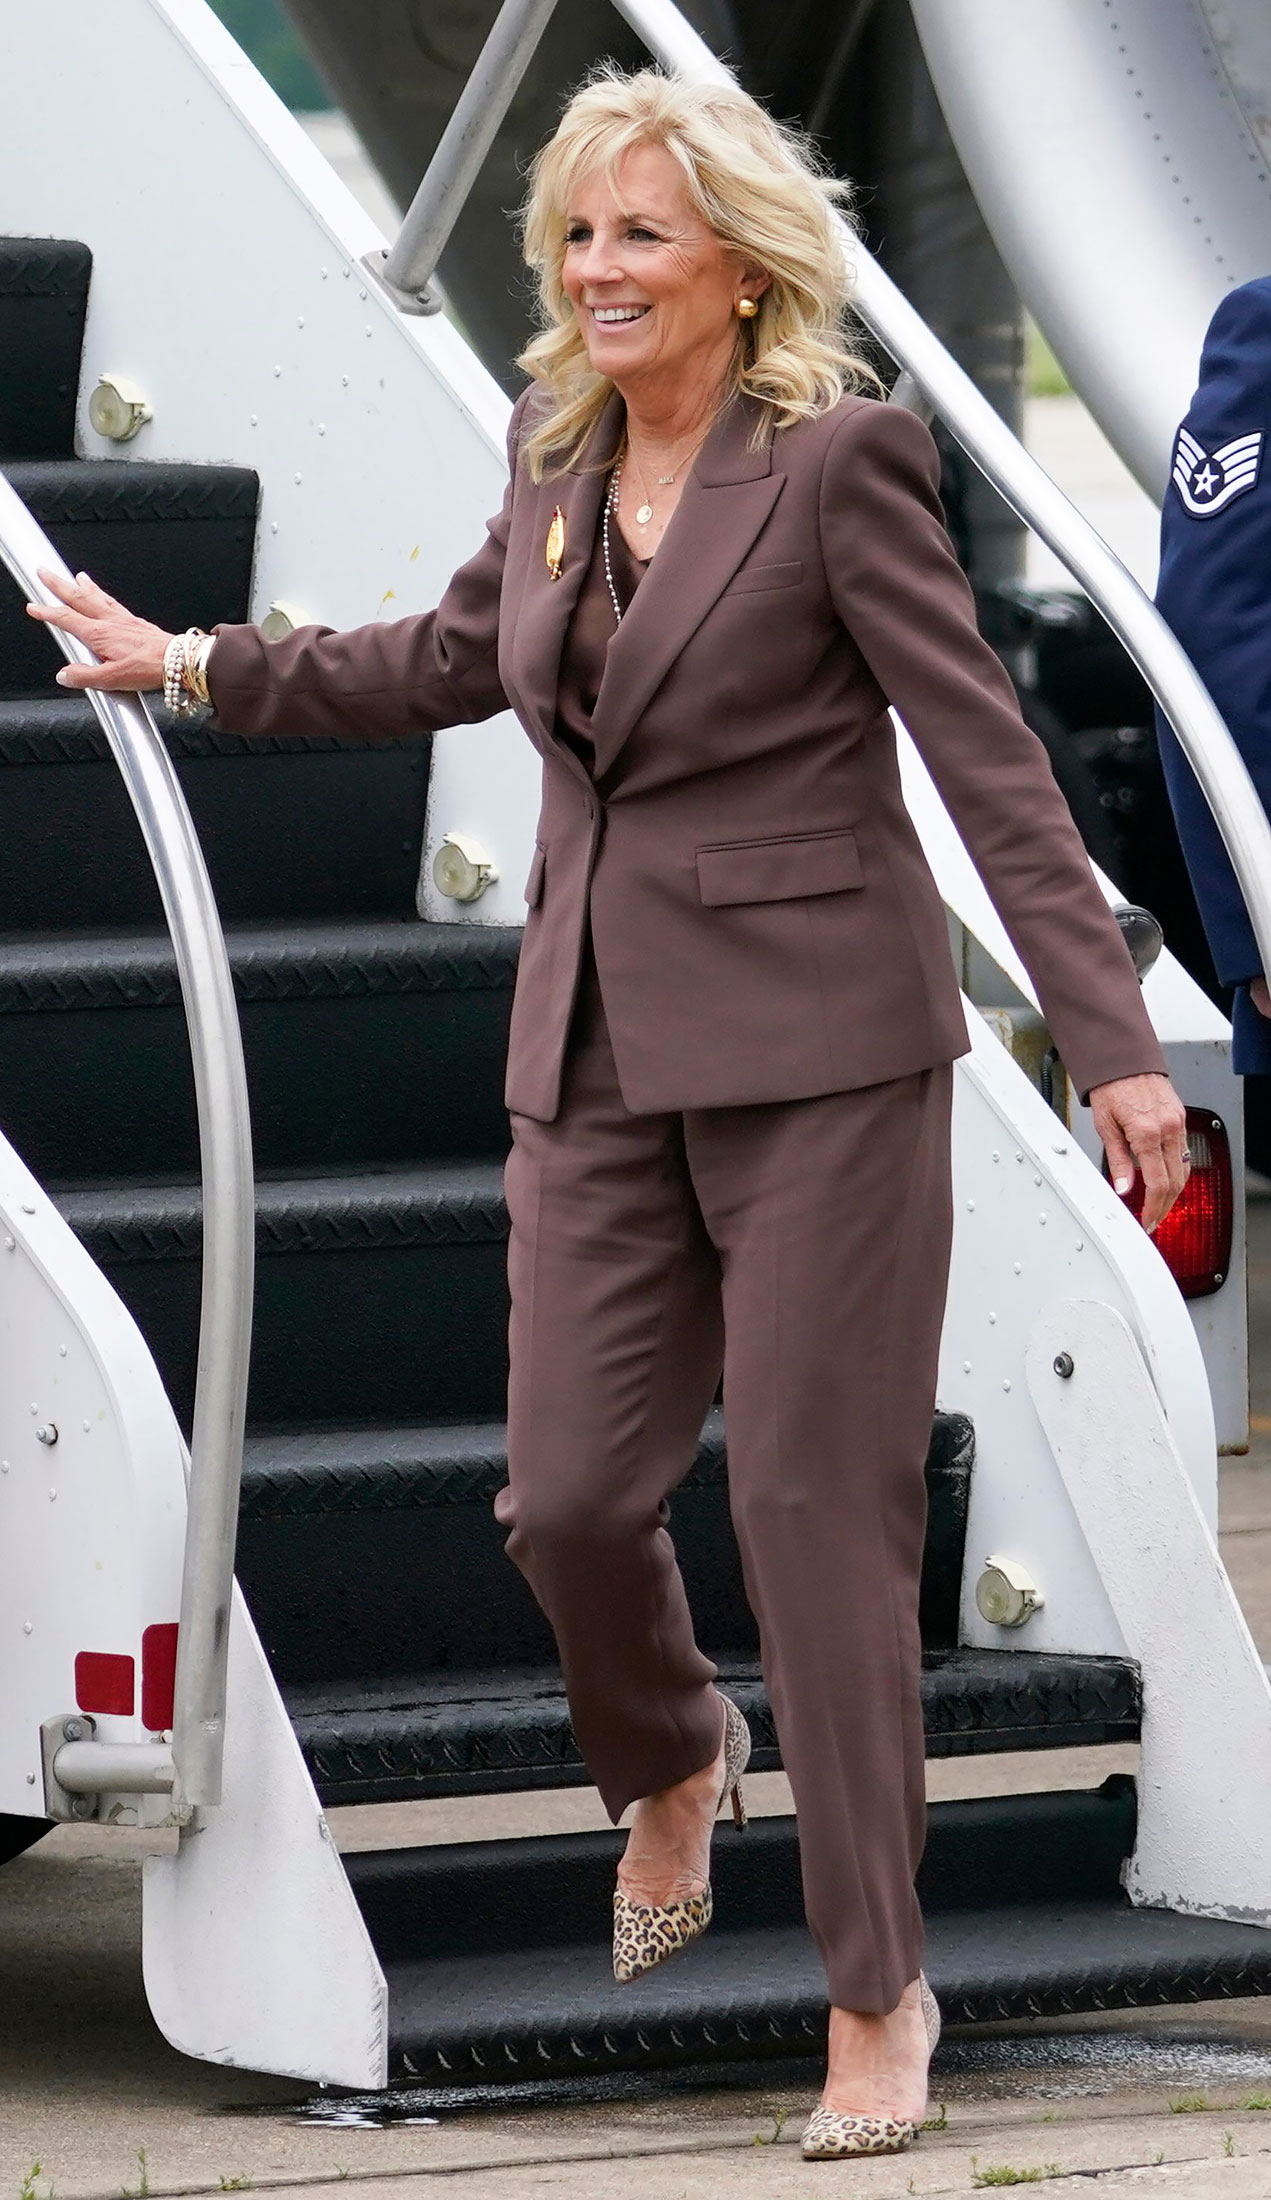 Dr. Jill Biden’s Leopard Pumps Prove Her Style Is Fierce and Feisty: Pic